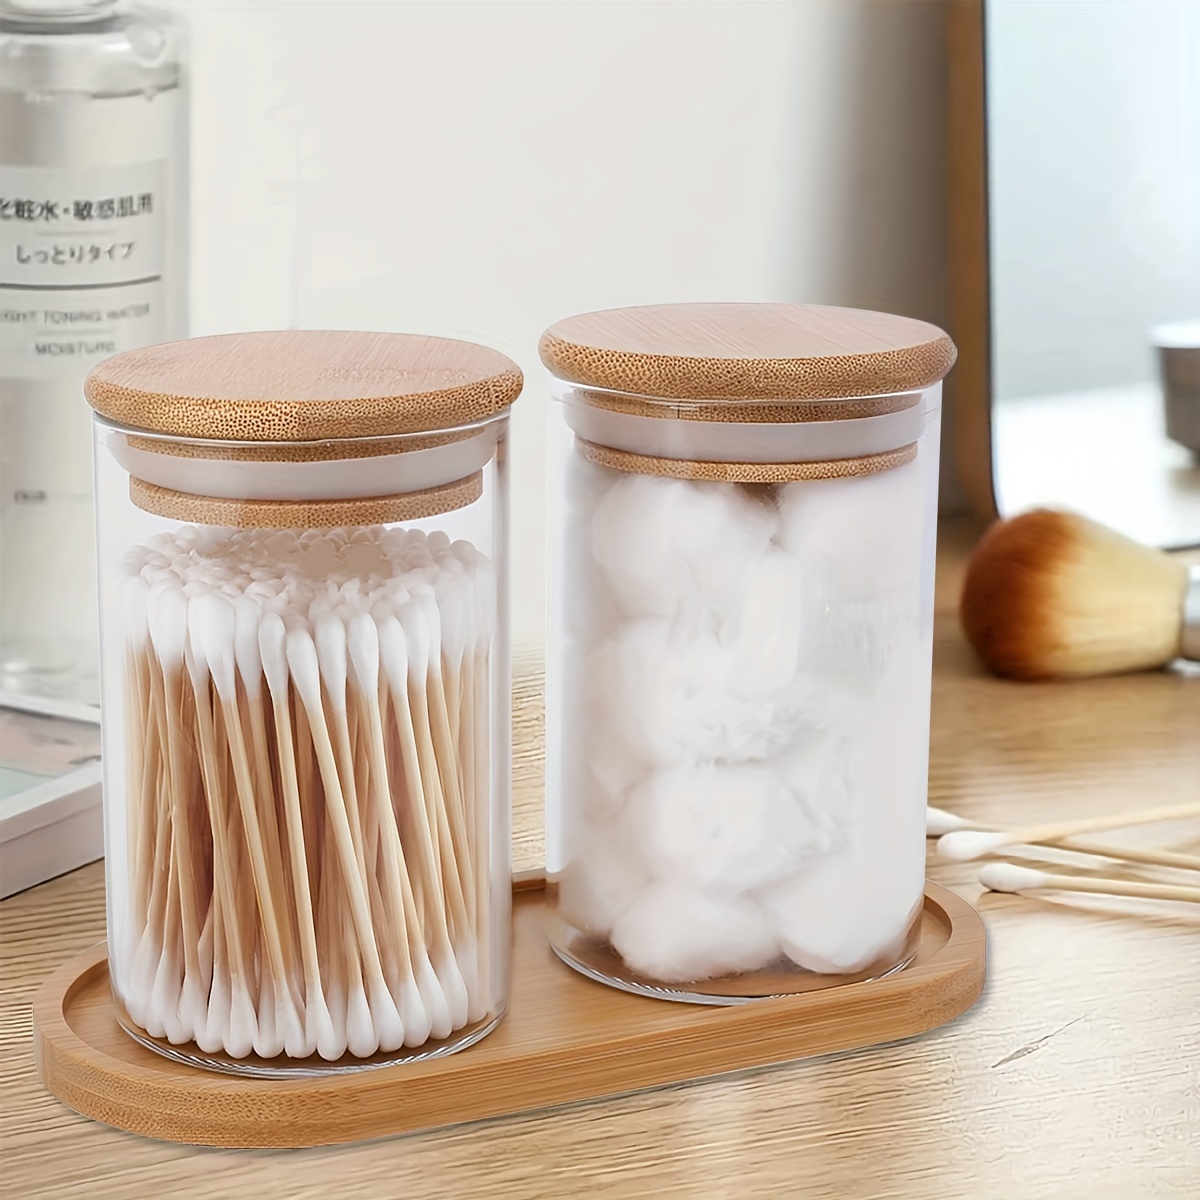 Set of 3 Small Glass Jars with Bamboo Lids - Decorative 13 Ounce